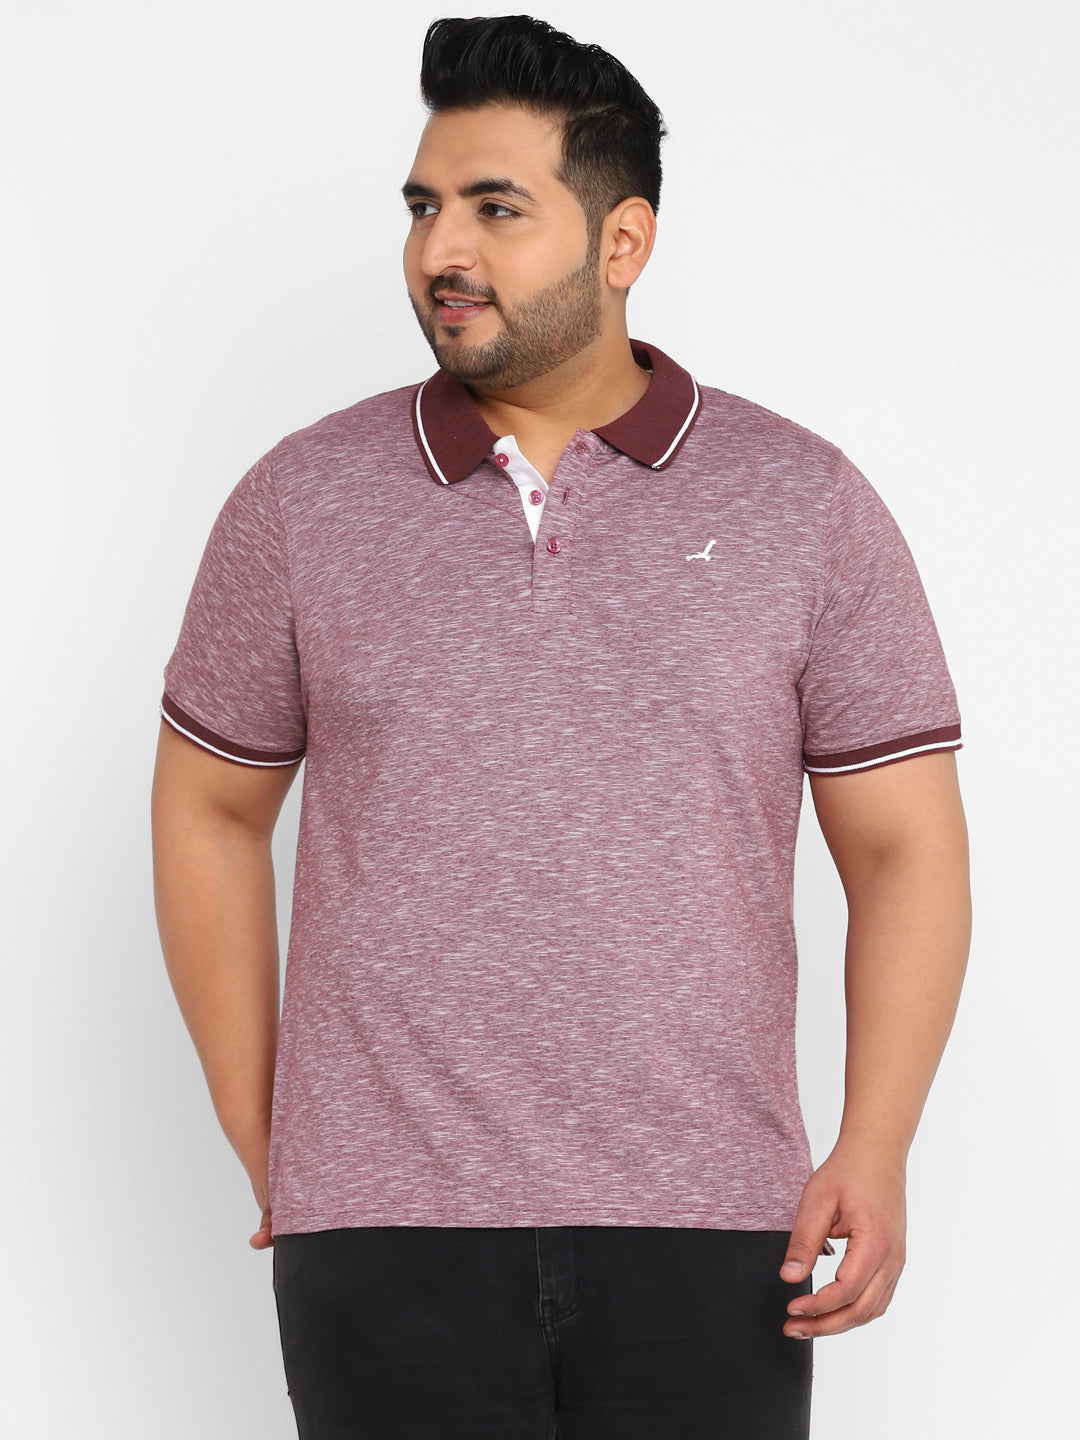 Polo Half Sleeves T-Shirt for Men - Maroon